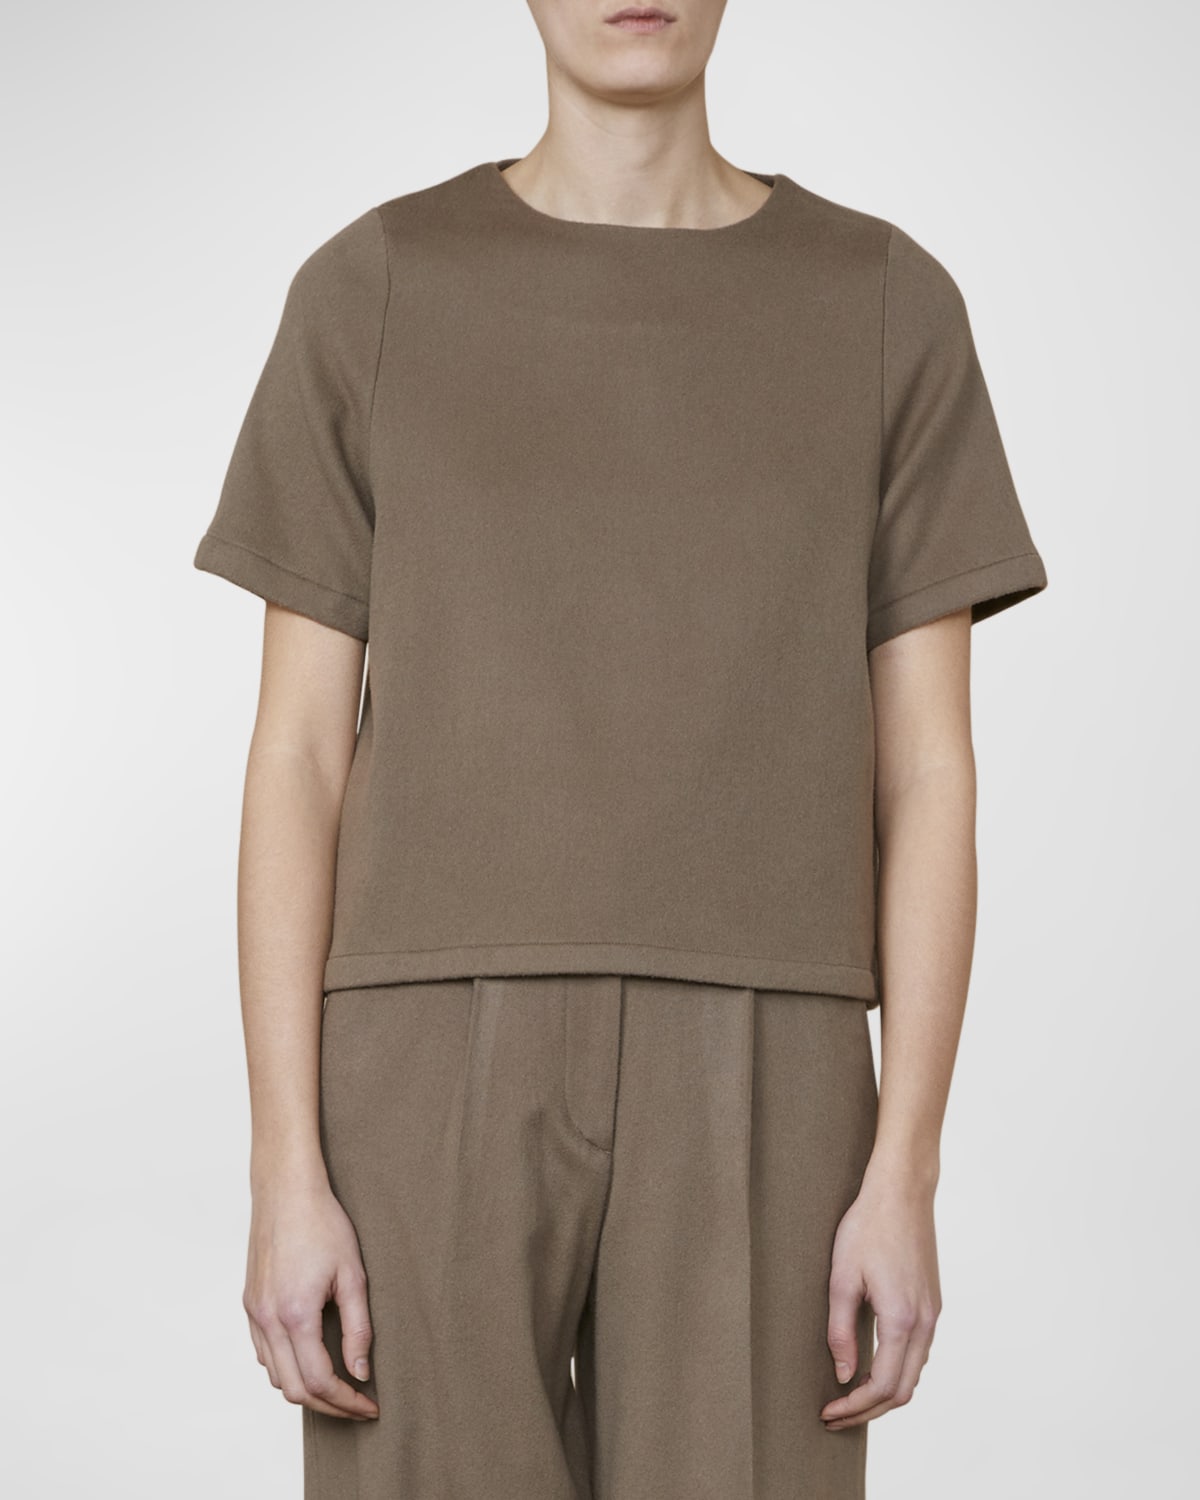 Keira Short-Sleeve Wool-Cashmere Top